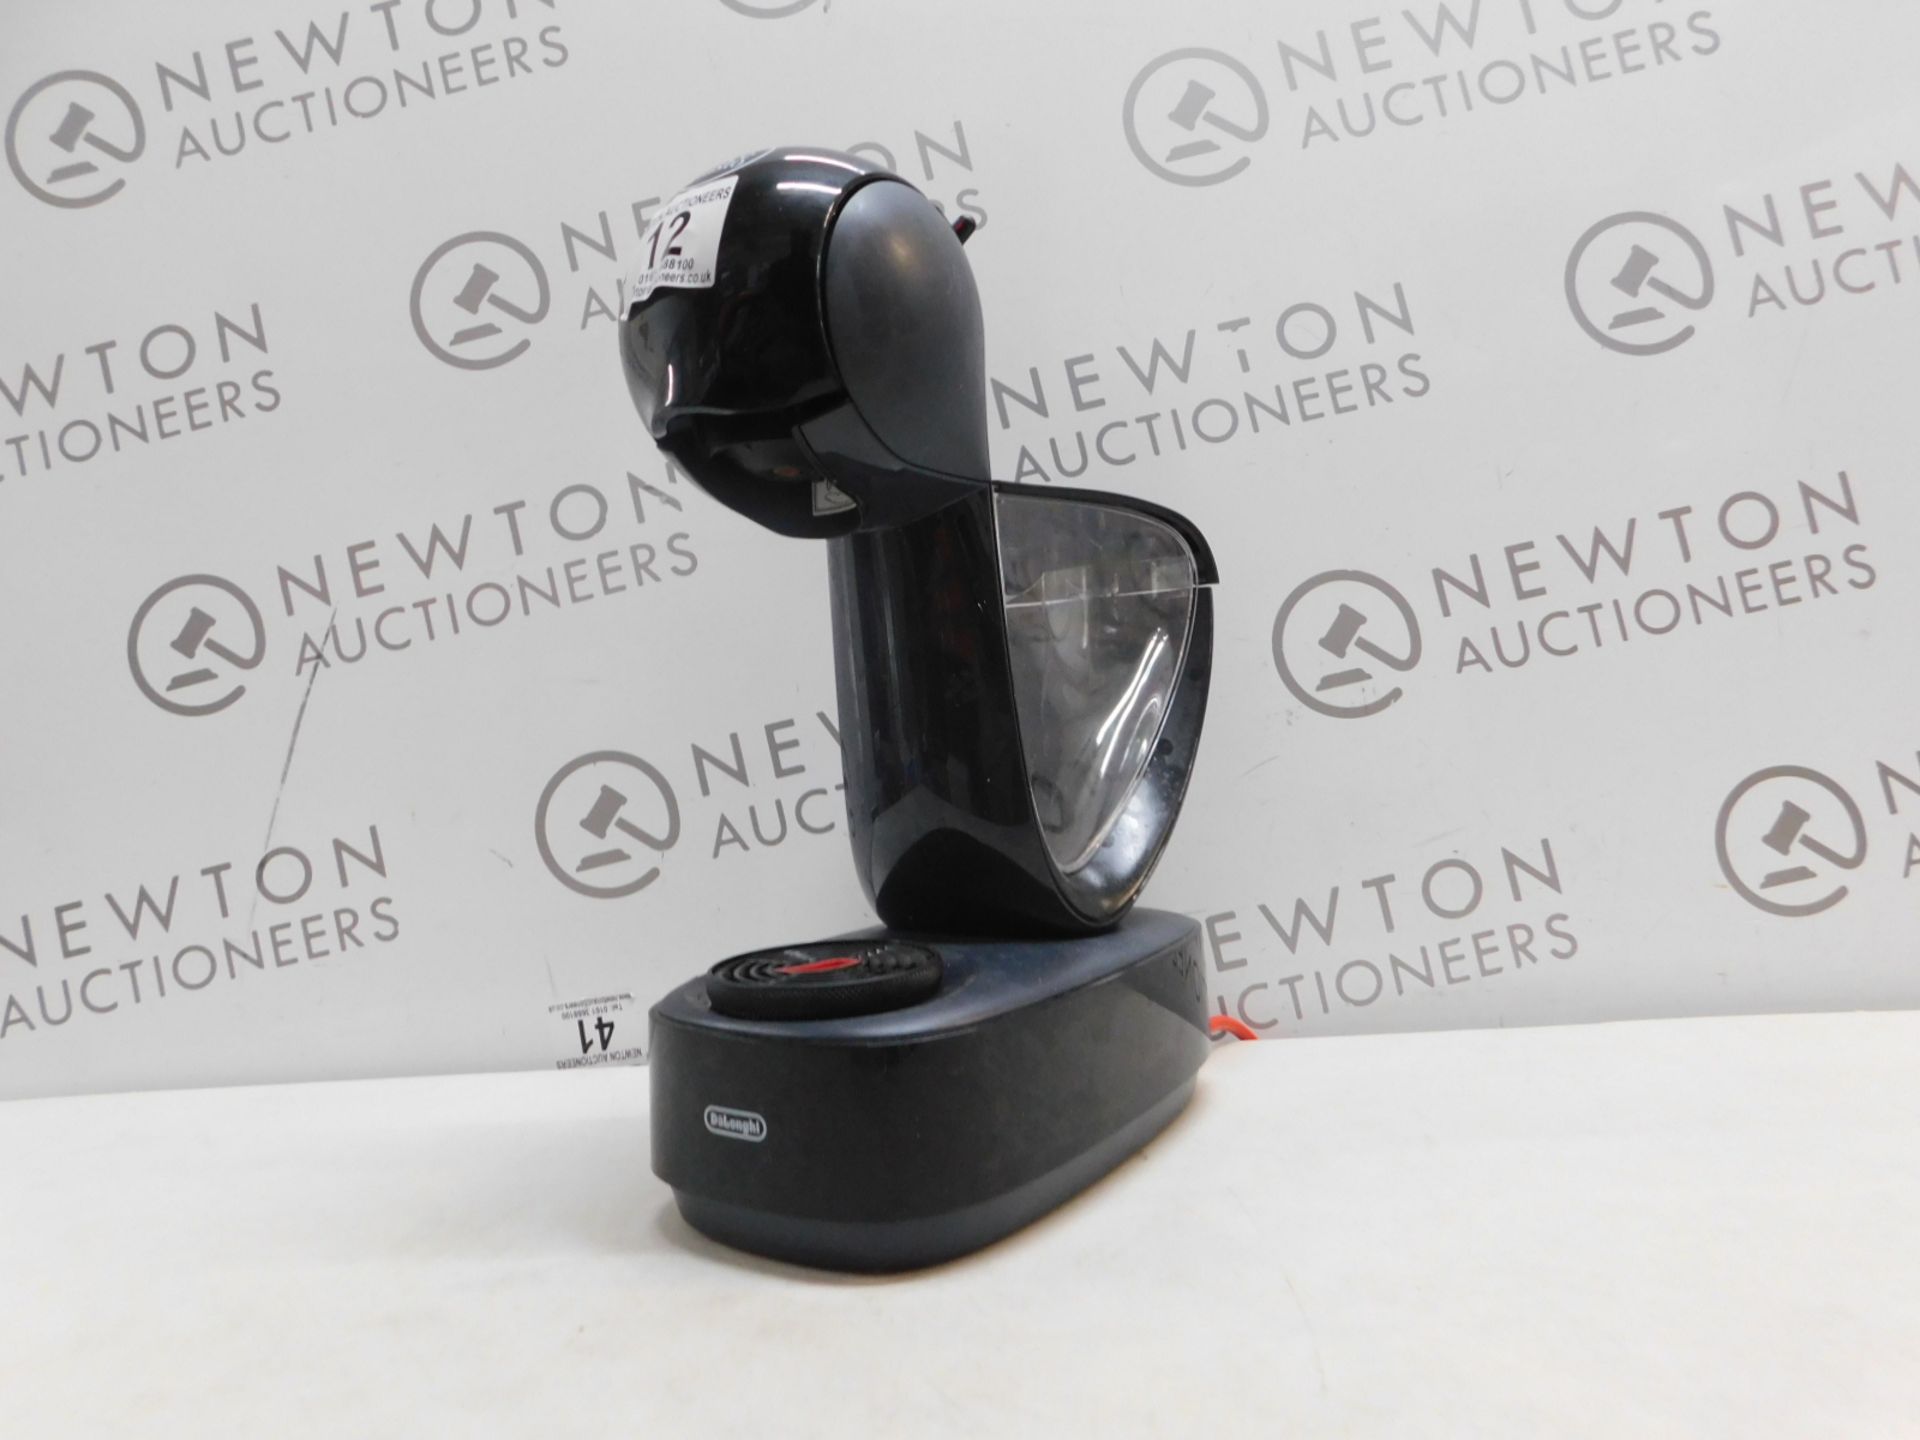 1 NESCAFE DOLCE GUSTO INFINISSIMA AUTOMATIC COFFEE POD MACHINE BY DELONGHI RRP Â£114.99